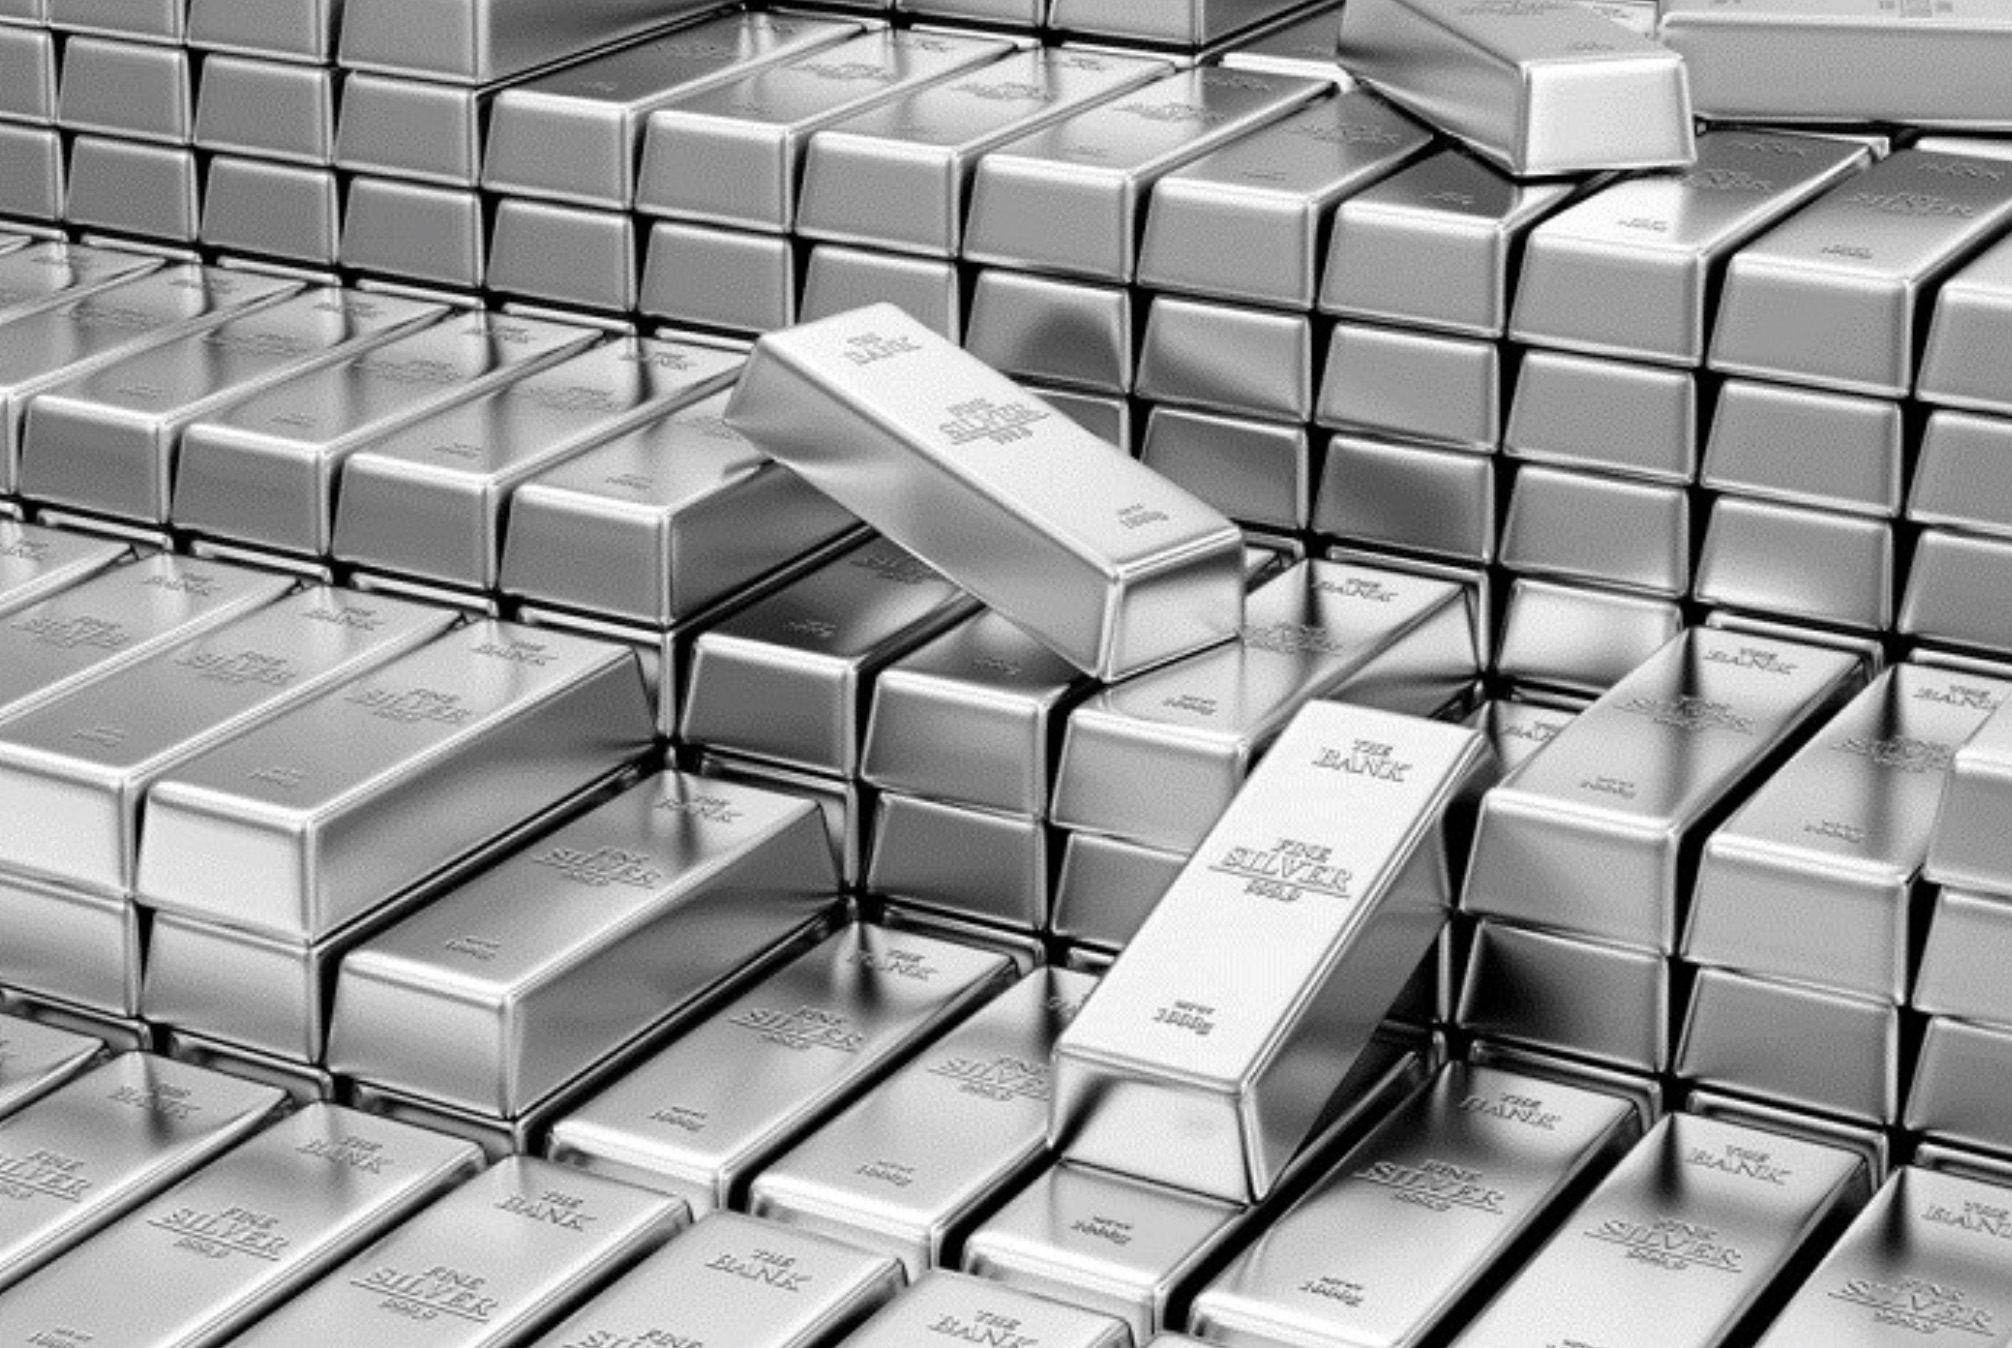 King World News - James Turk - Is The Price Of Silver About To Skyrocket Like It Did In 2010-2011?